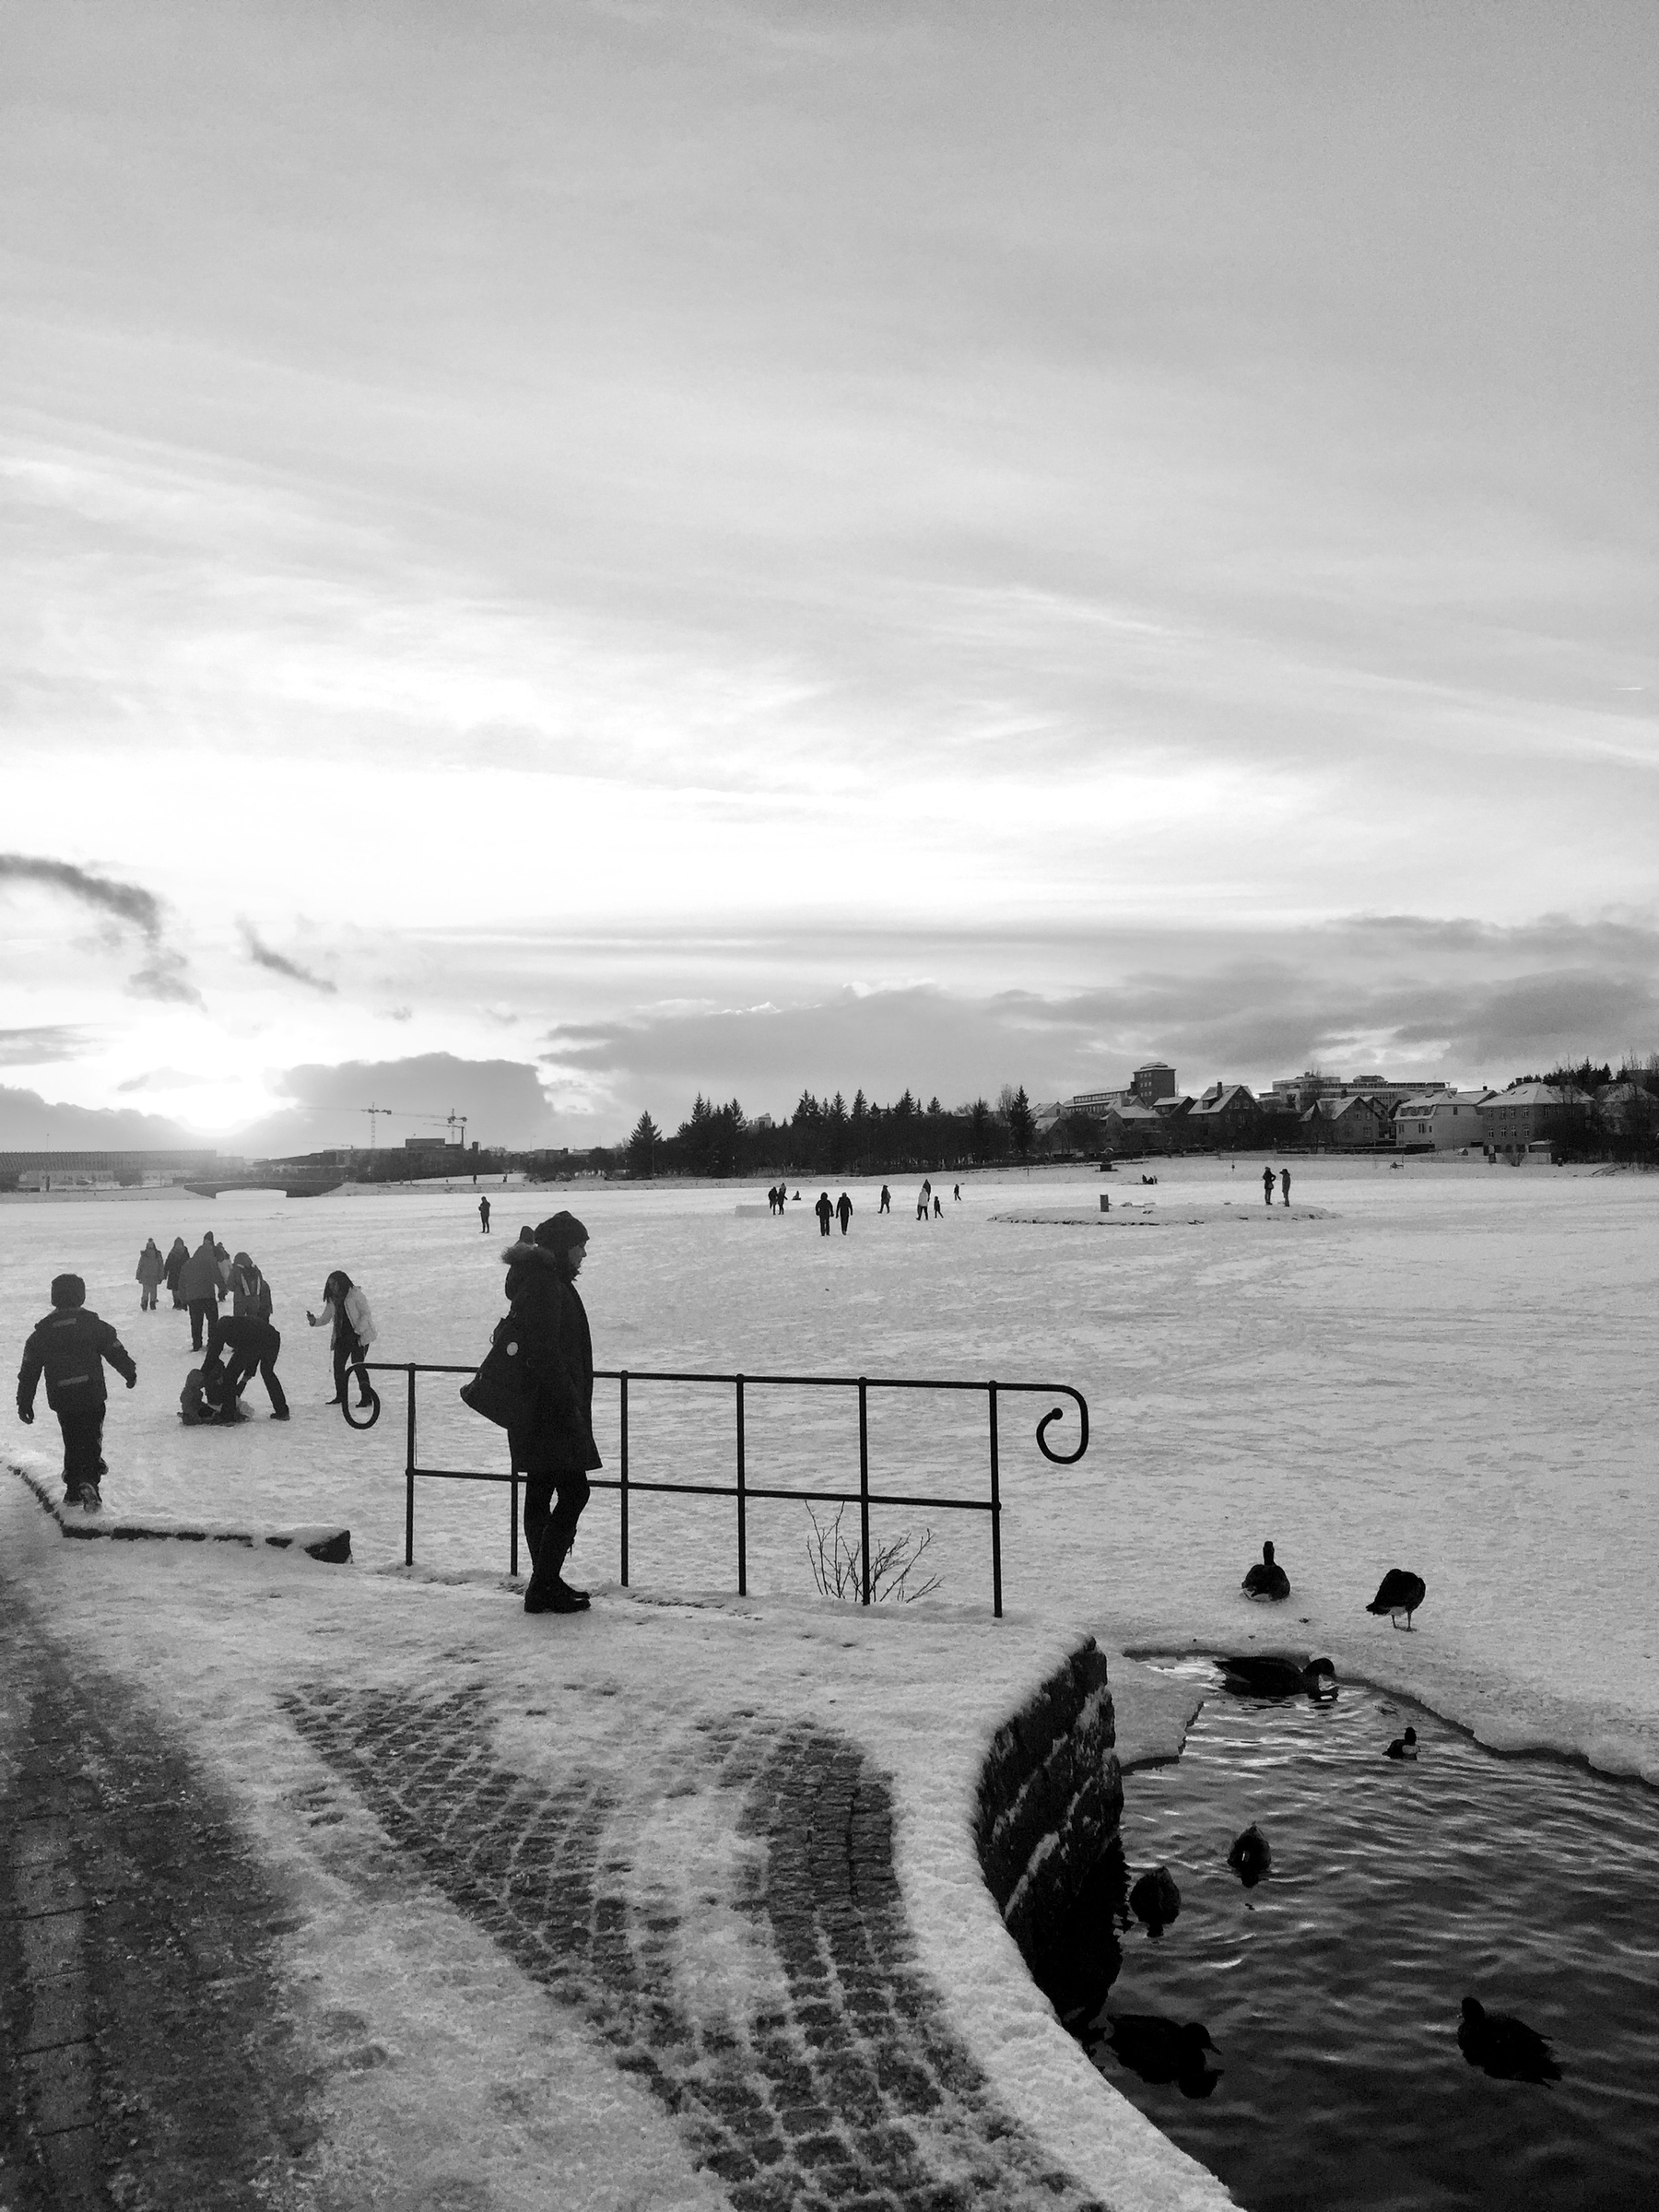 A photo of people by the pond in Reykjavík city centre. The pond is frozen solid.